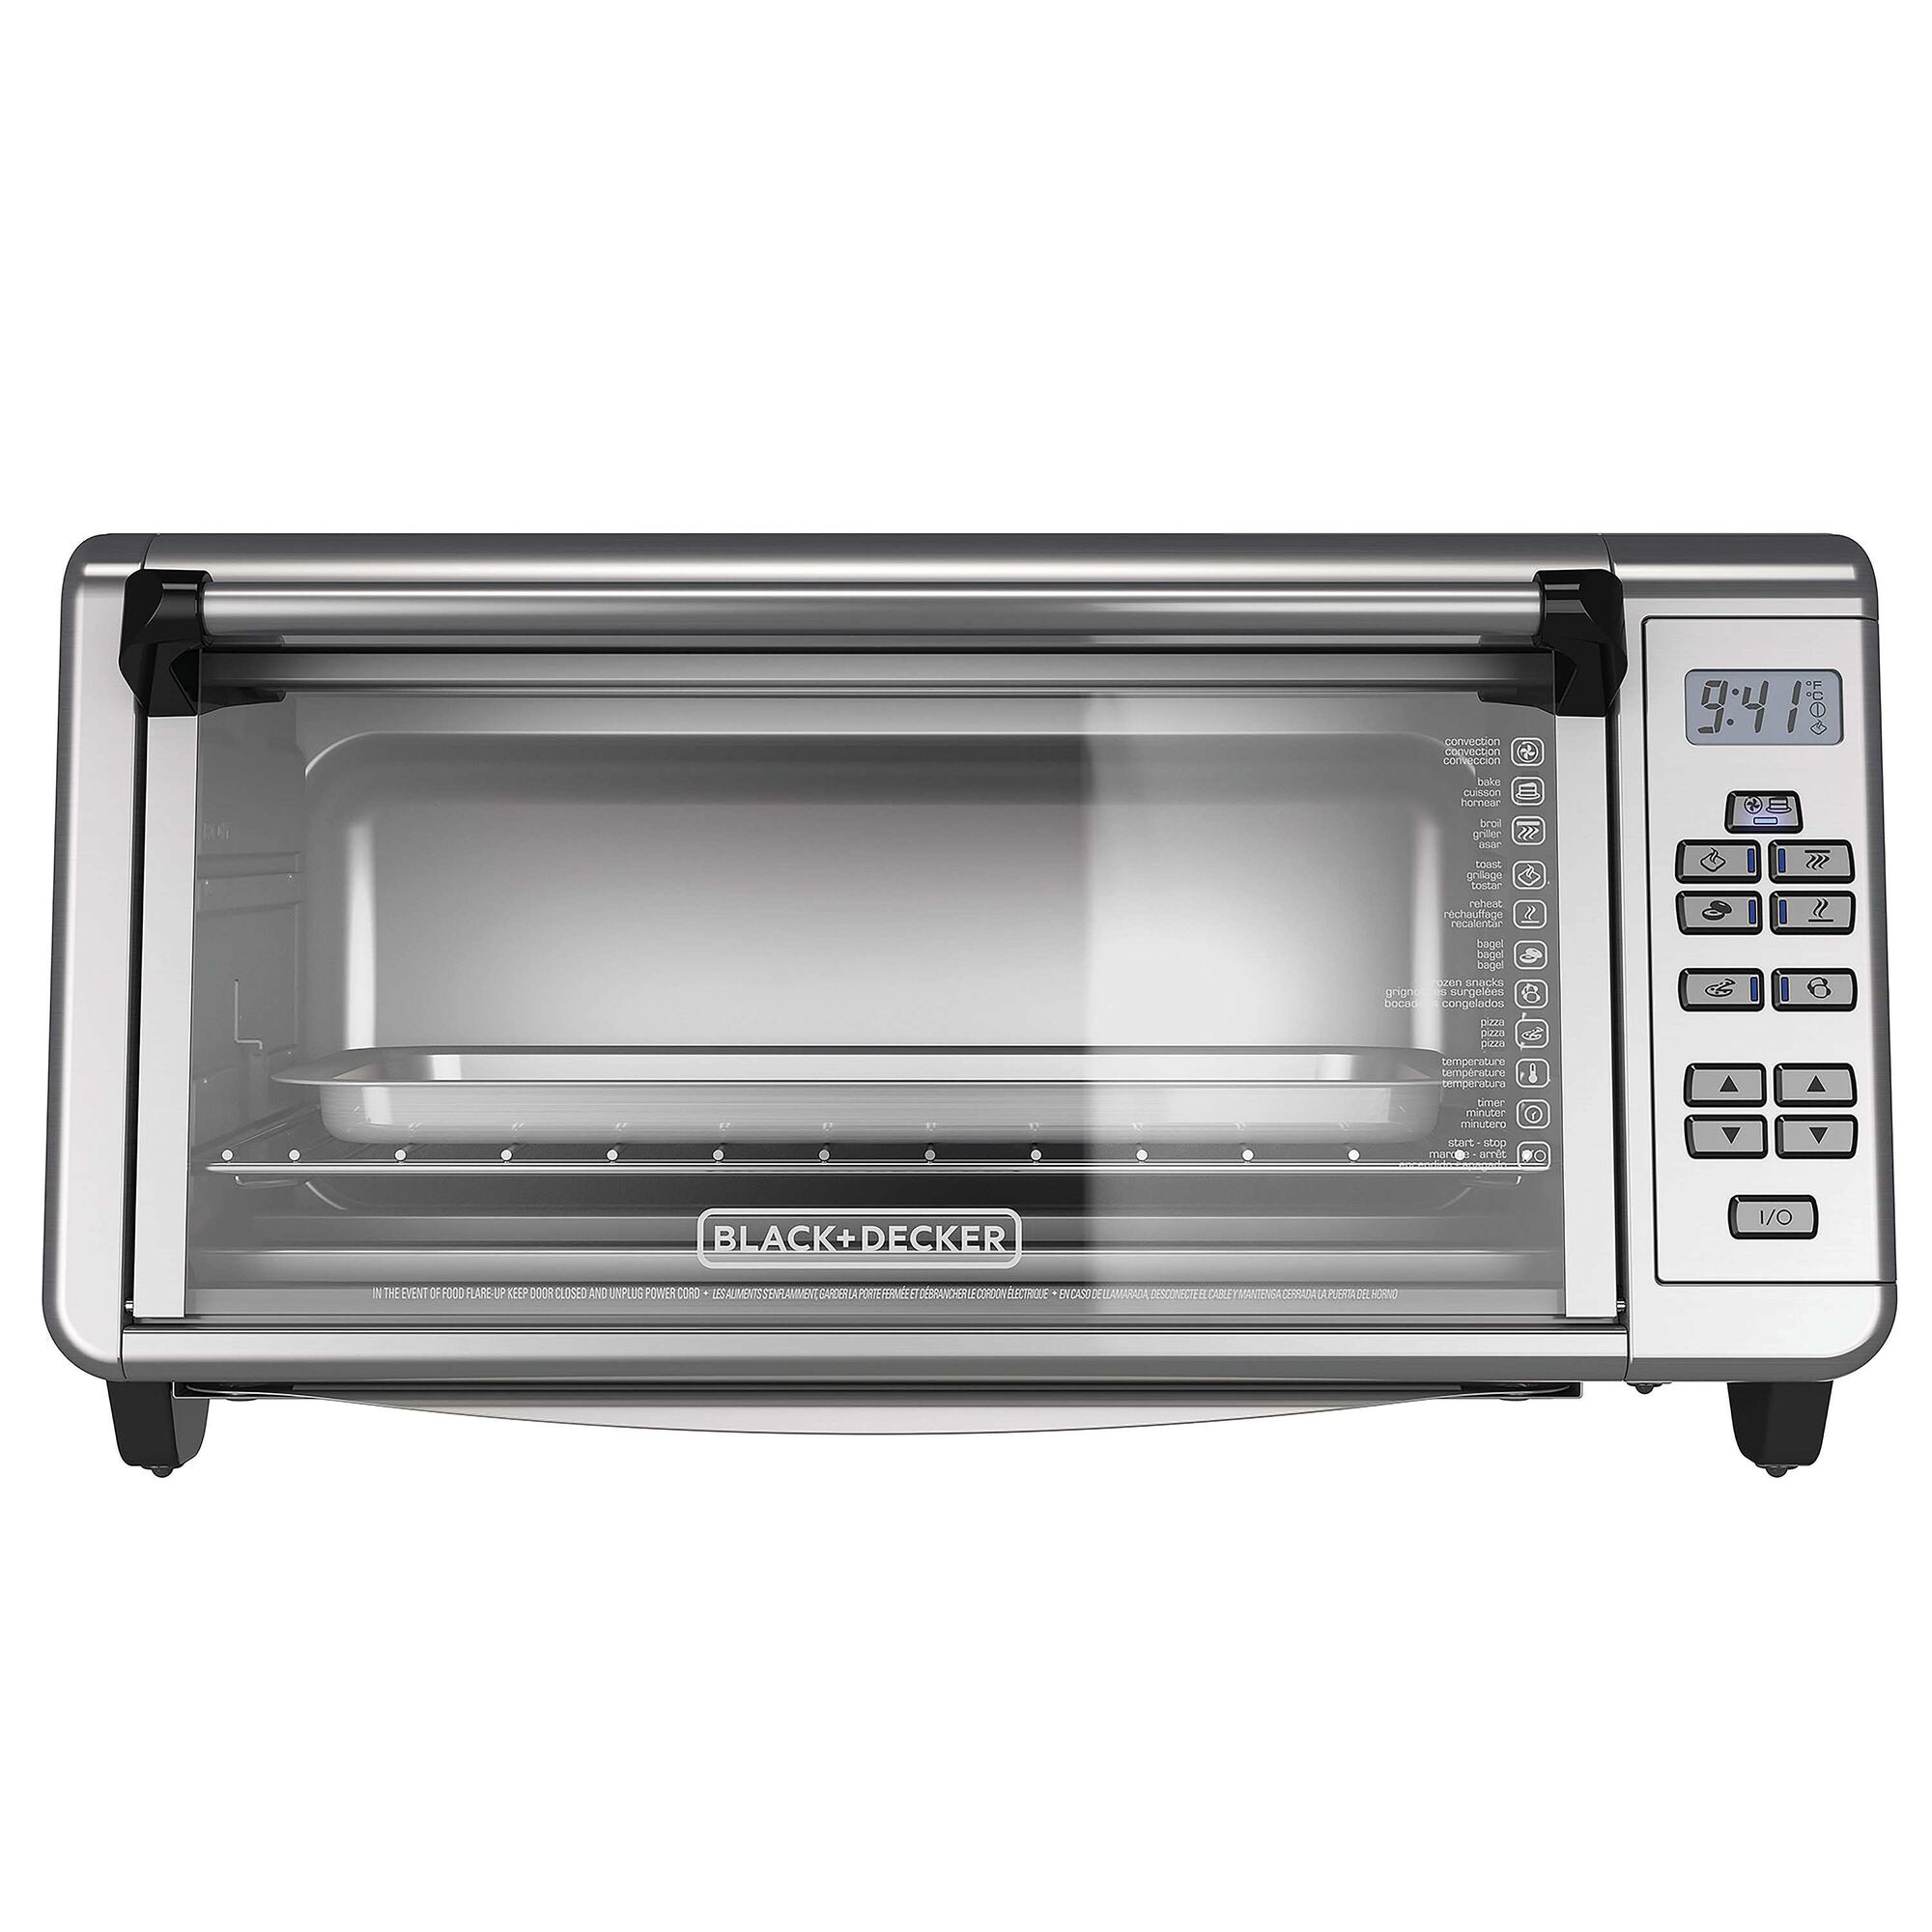 8 Slice Digital Extra Wide Convection Oven.